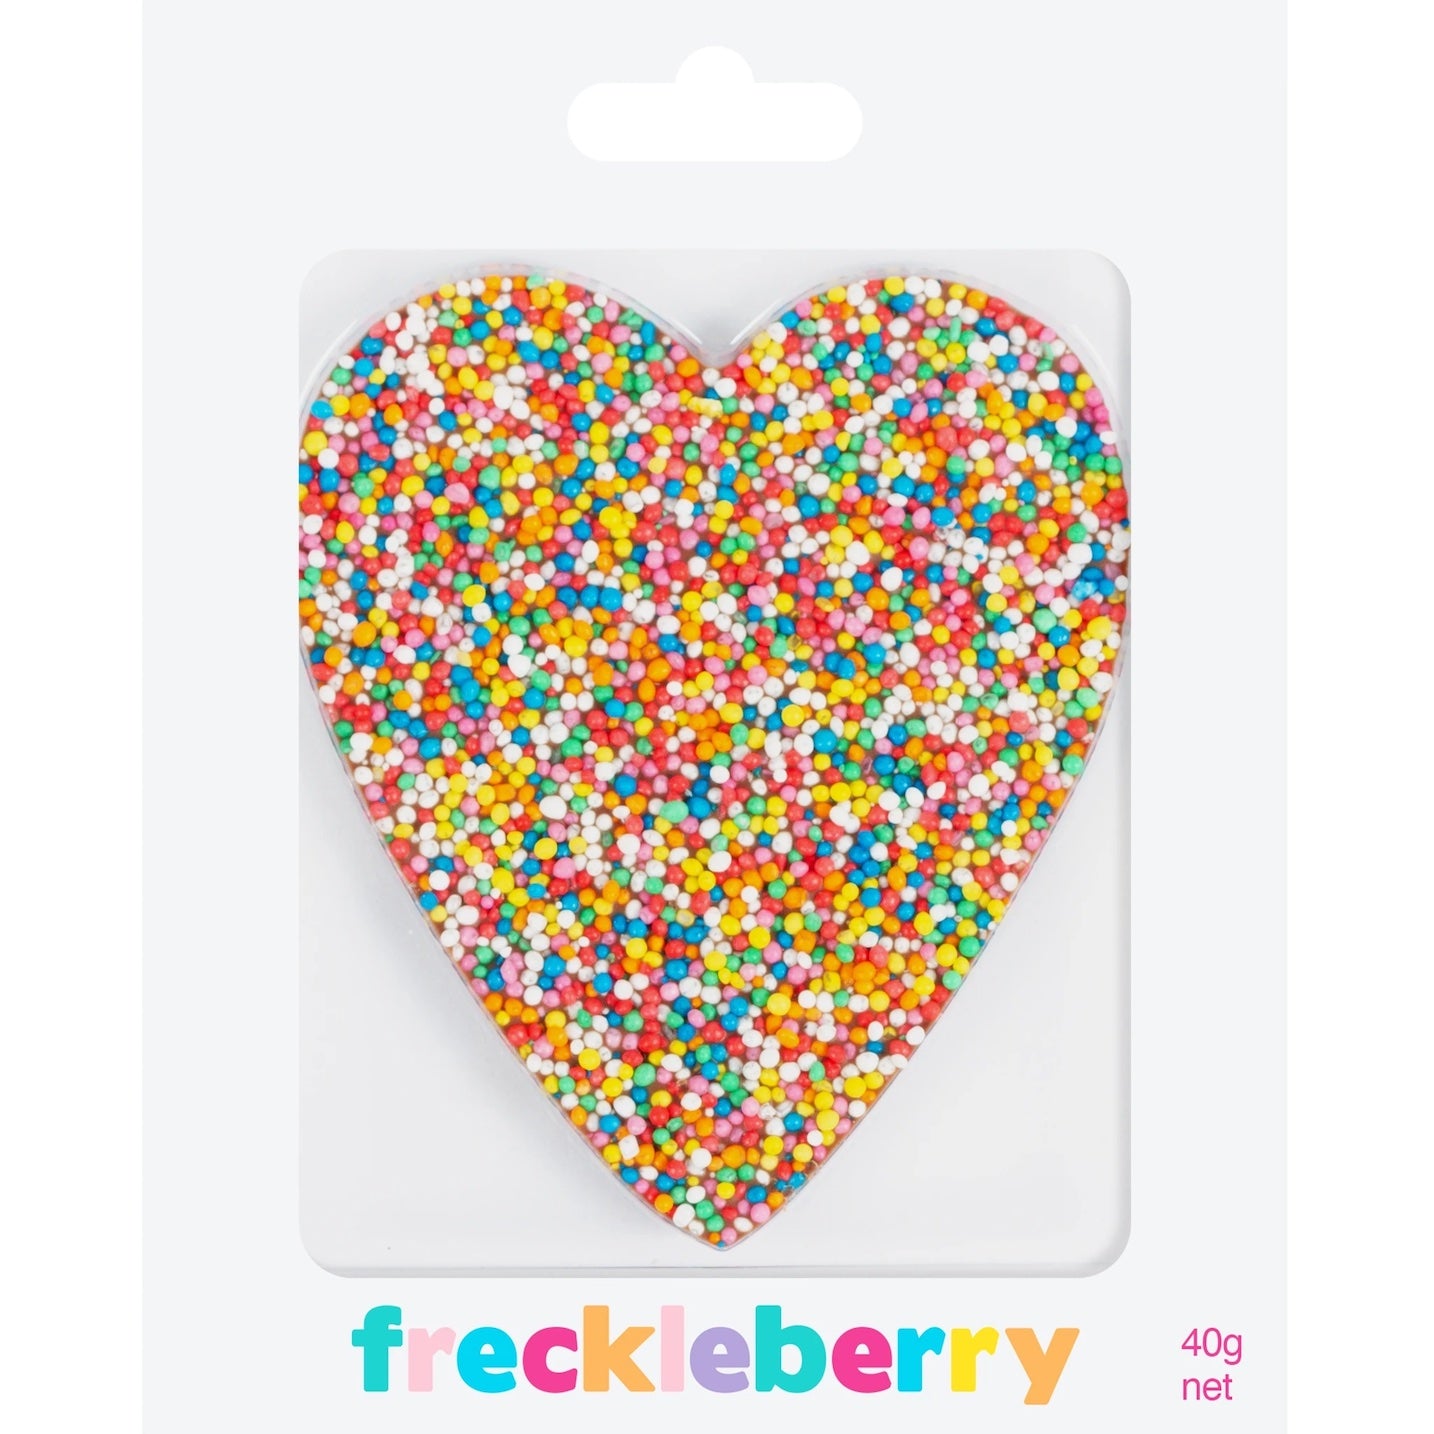 Gorgeous milk chocolate freckle in the shape of a heart. Makes the perfect gift.